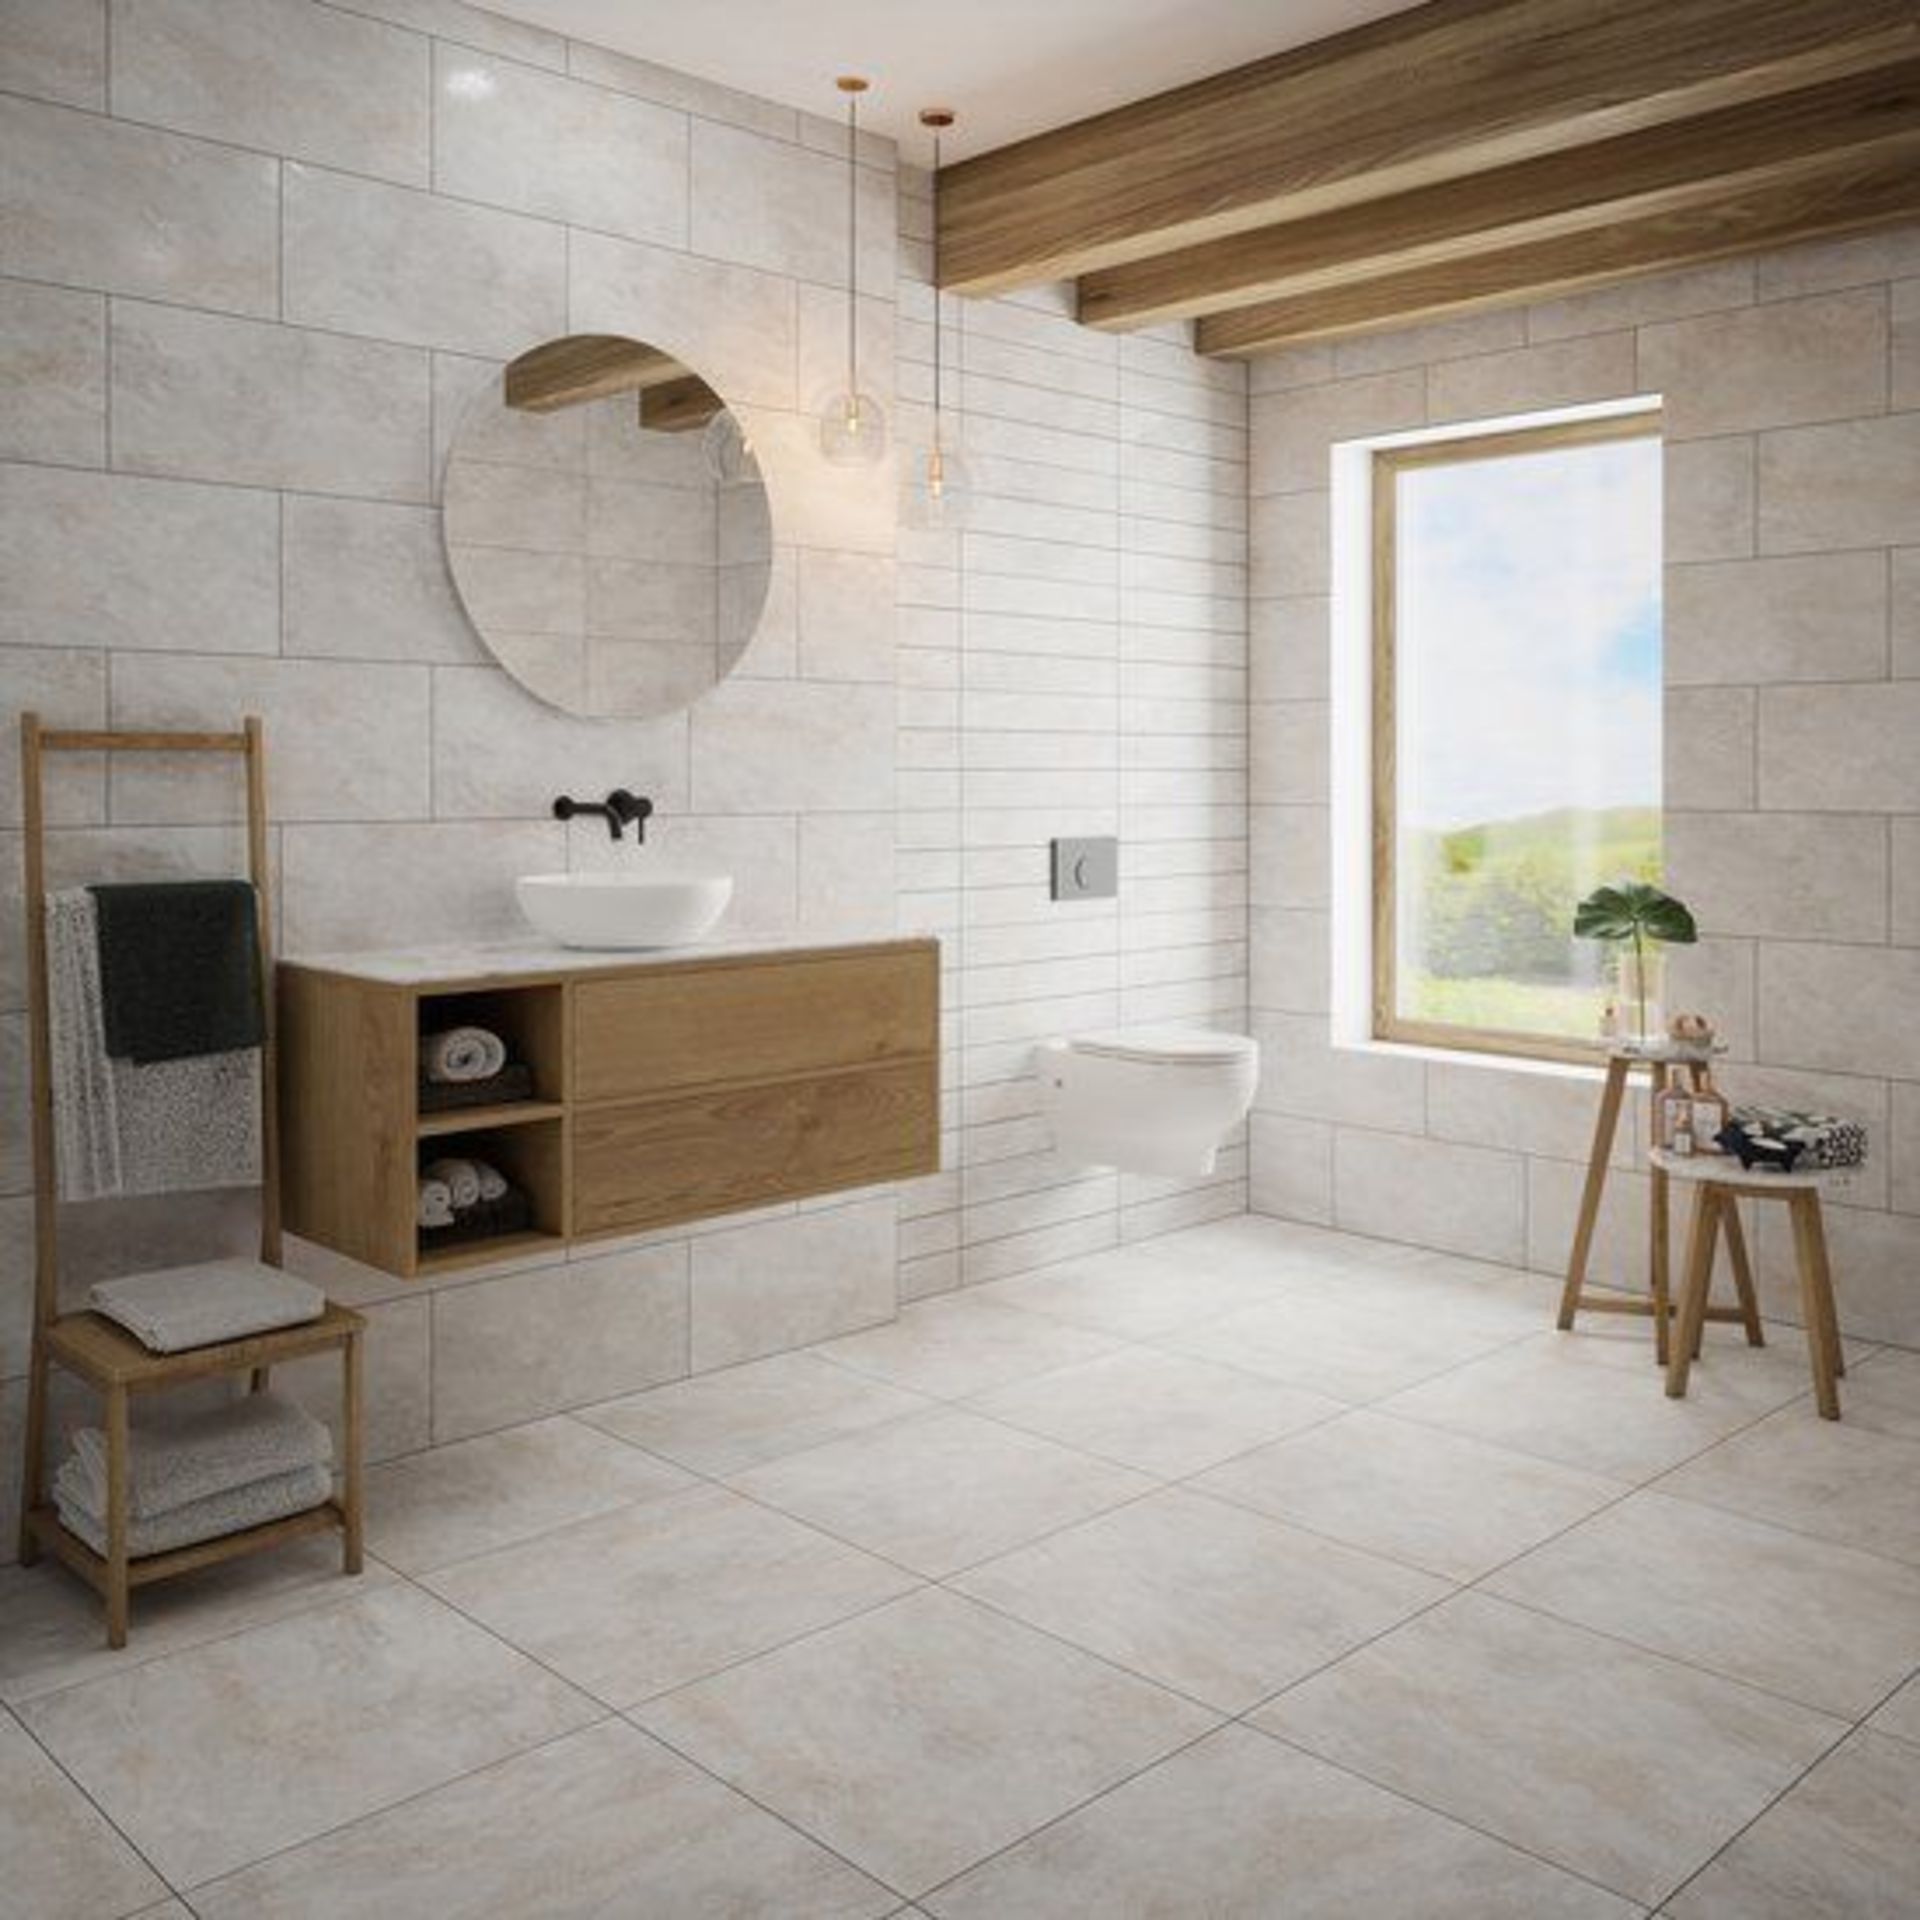 8 X PACKS OF JOHNSONS ARLO GLAZED PORCELAIN FLOOR & WALL TILES. (AARL2F) EACH PACK CONTAINS 1MSQ, - Image 2 of 2